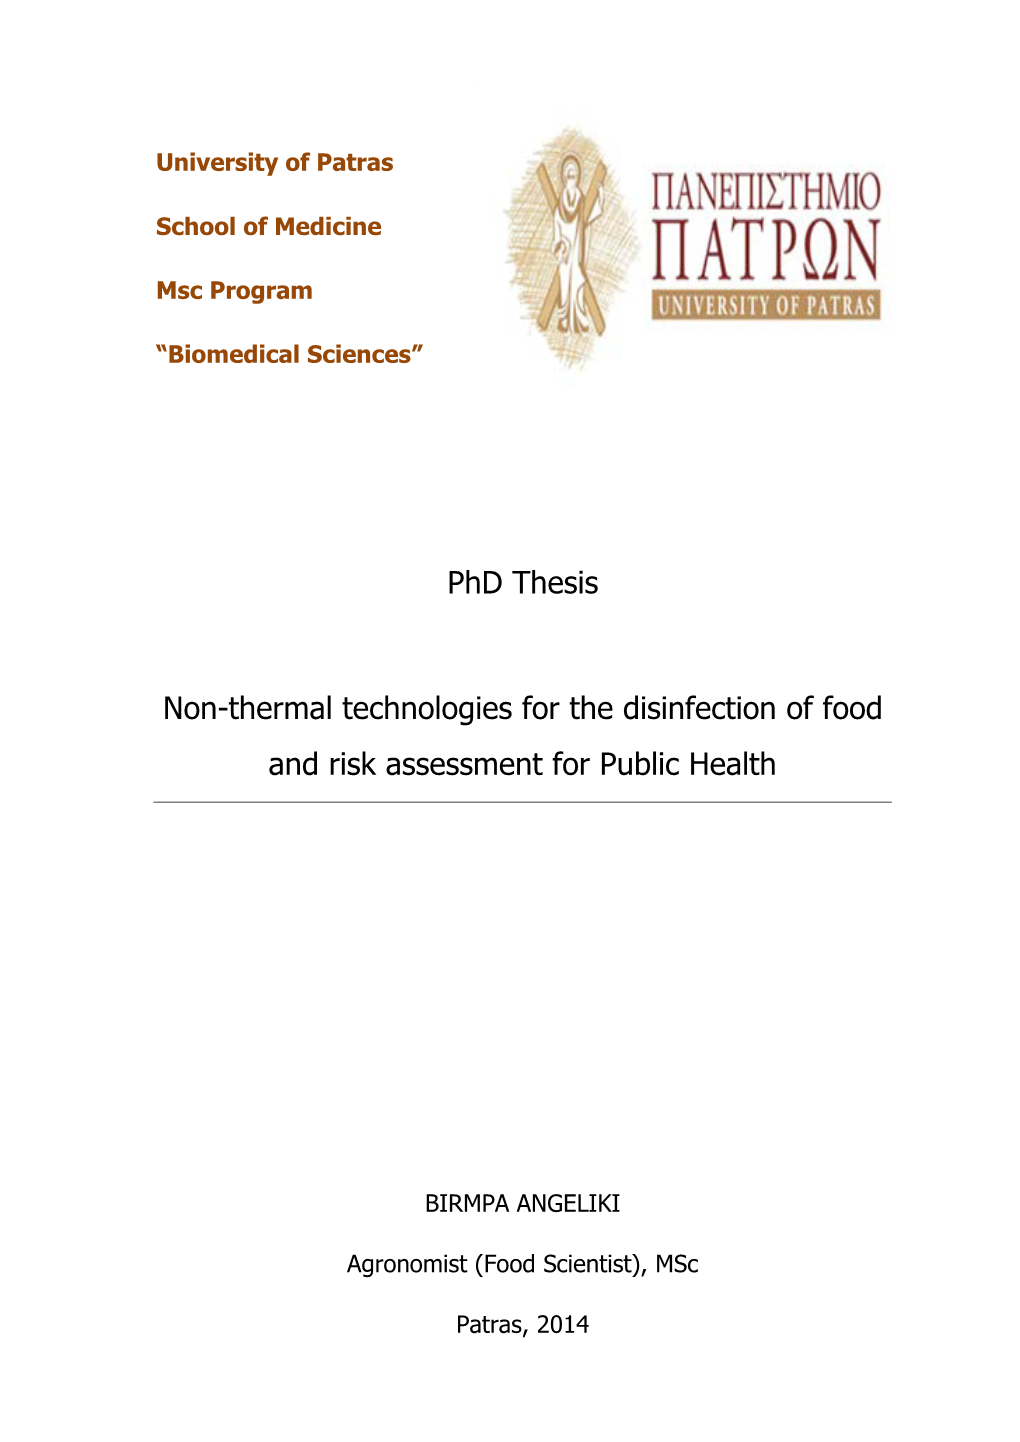 Phd Thesis Non-Thermal Technologies for the Disinfection of Food and Risk